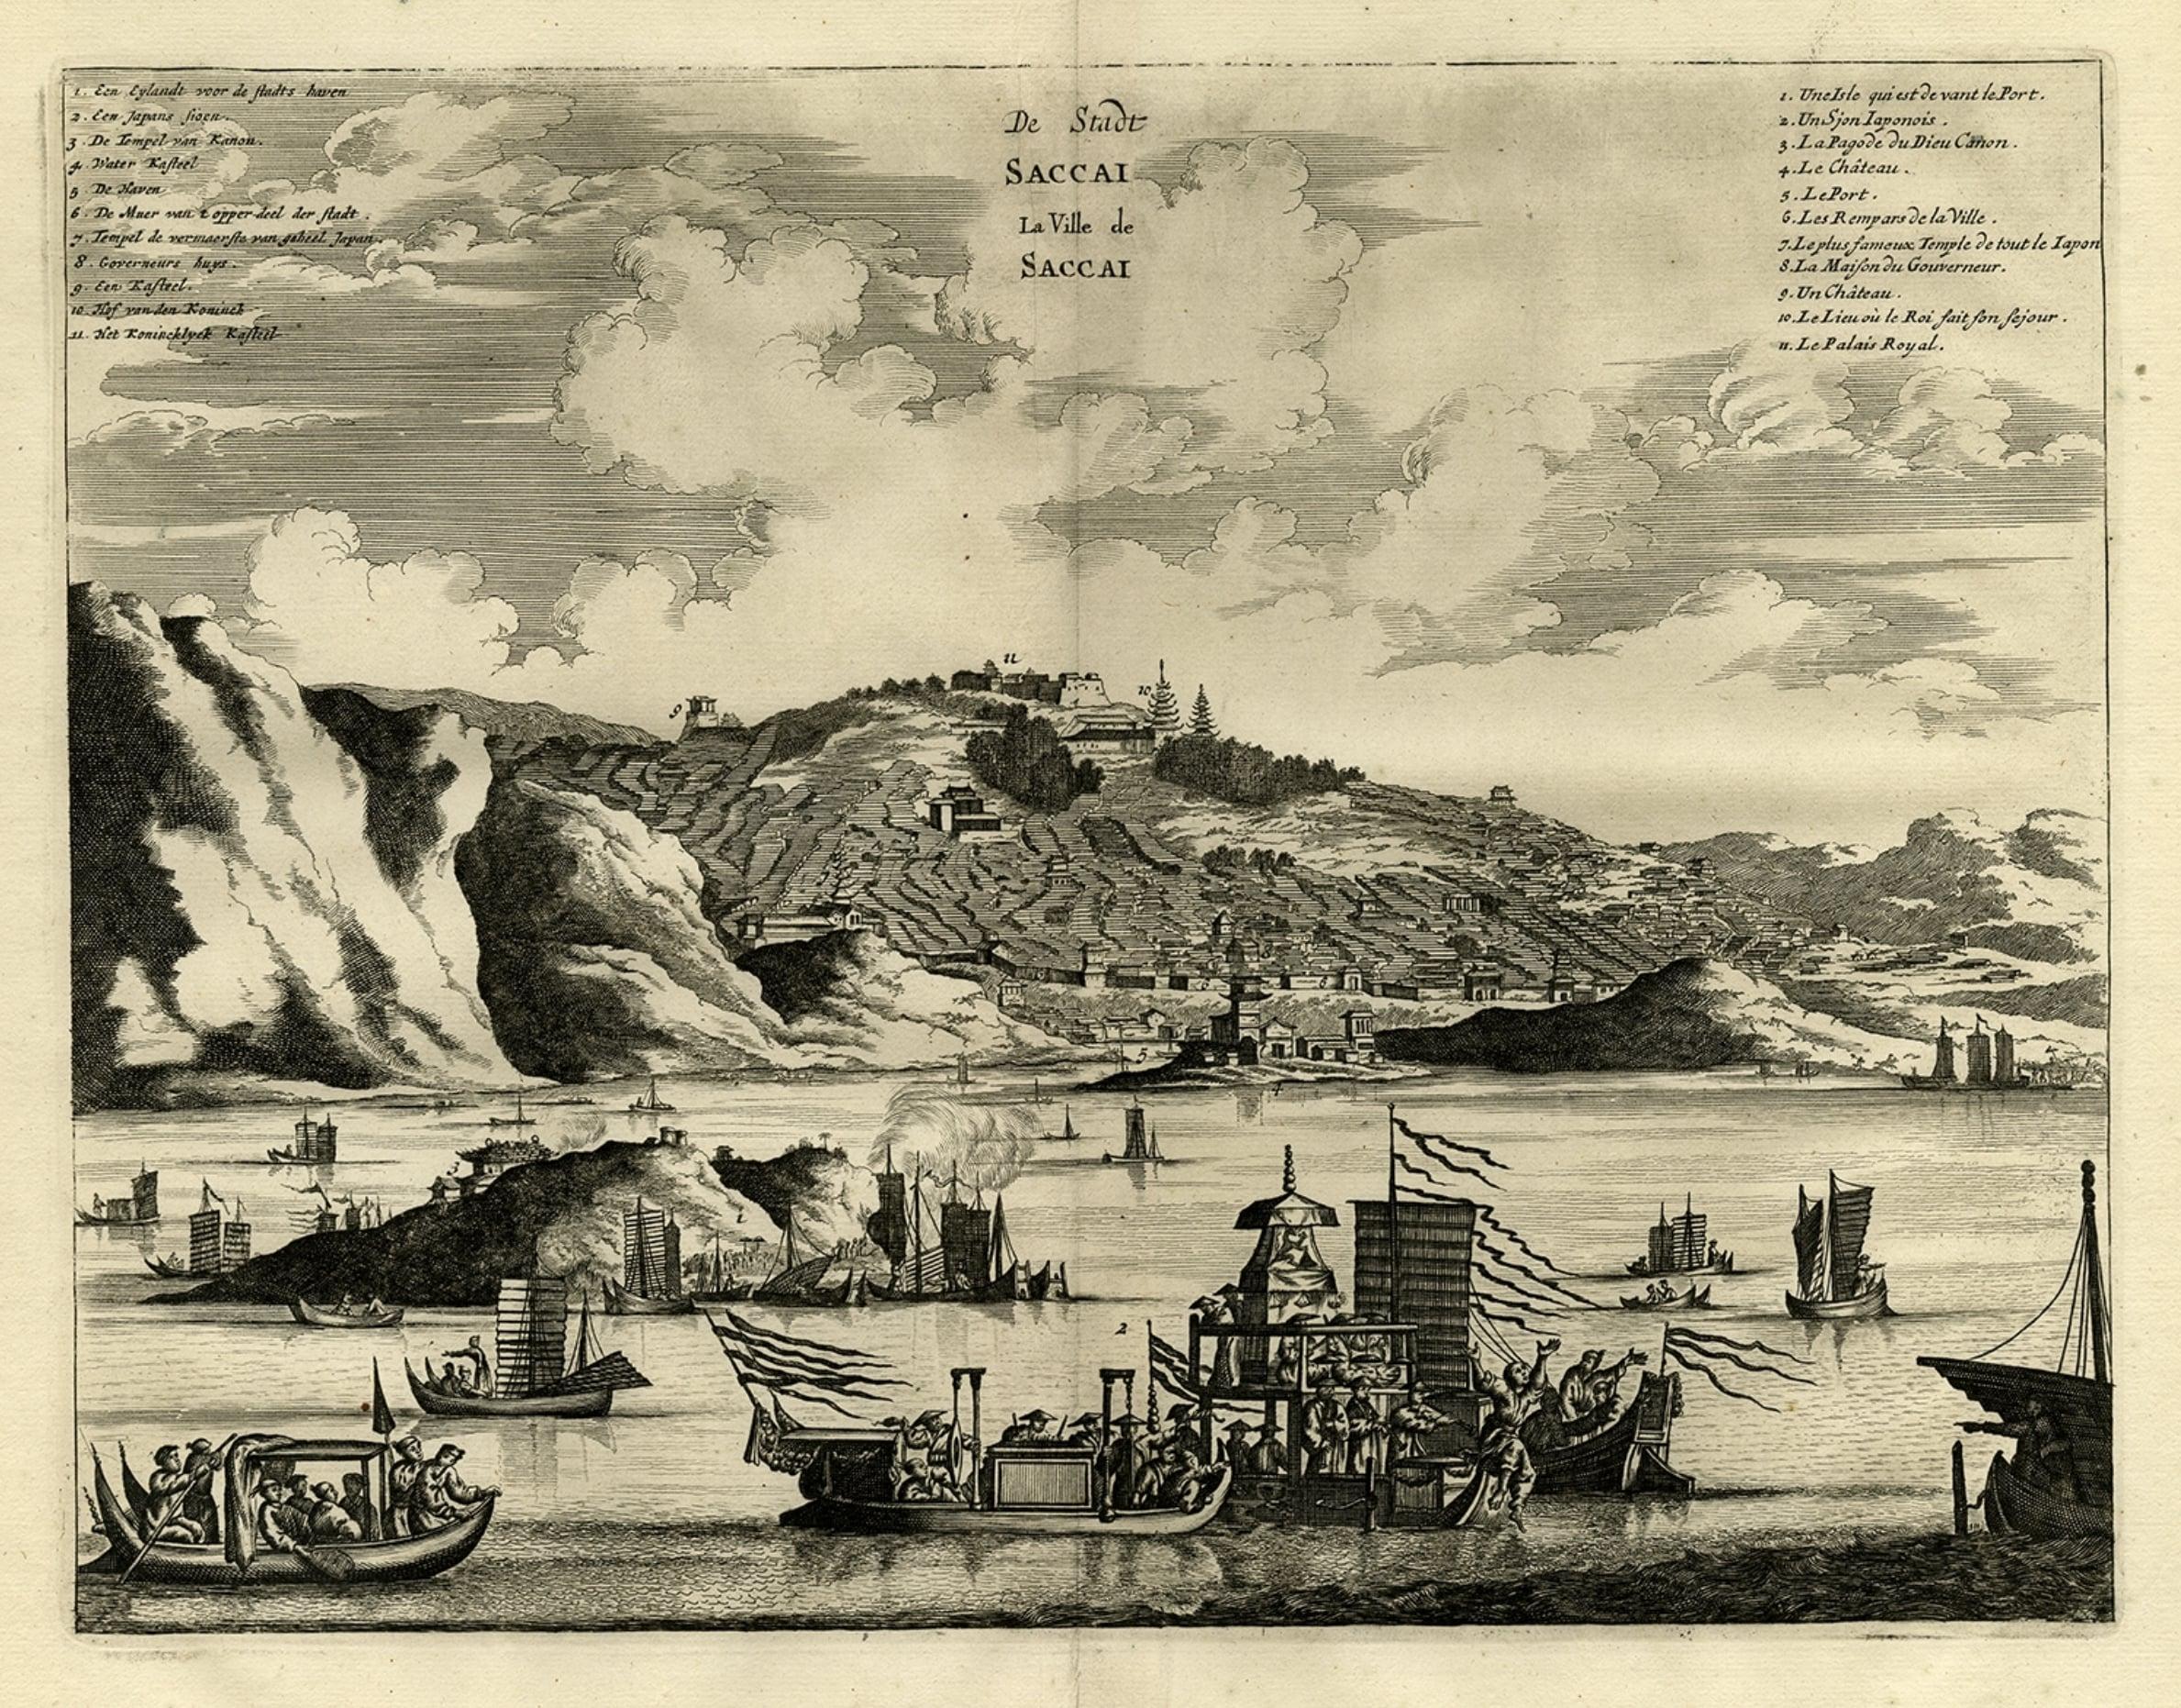 Antique print, titled: 'De Stadt Saccai. La Ville de Saccai.' - ('The City Saccai'). 

This plate shows a view of Sakai in the Osaka Prefecture, Japan. Sakai has been one of the largest and most important seaports of Japan since the Medieval era.